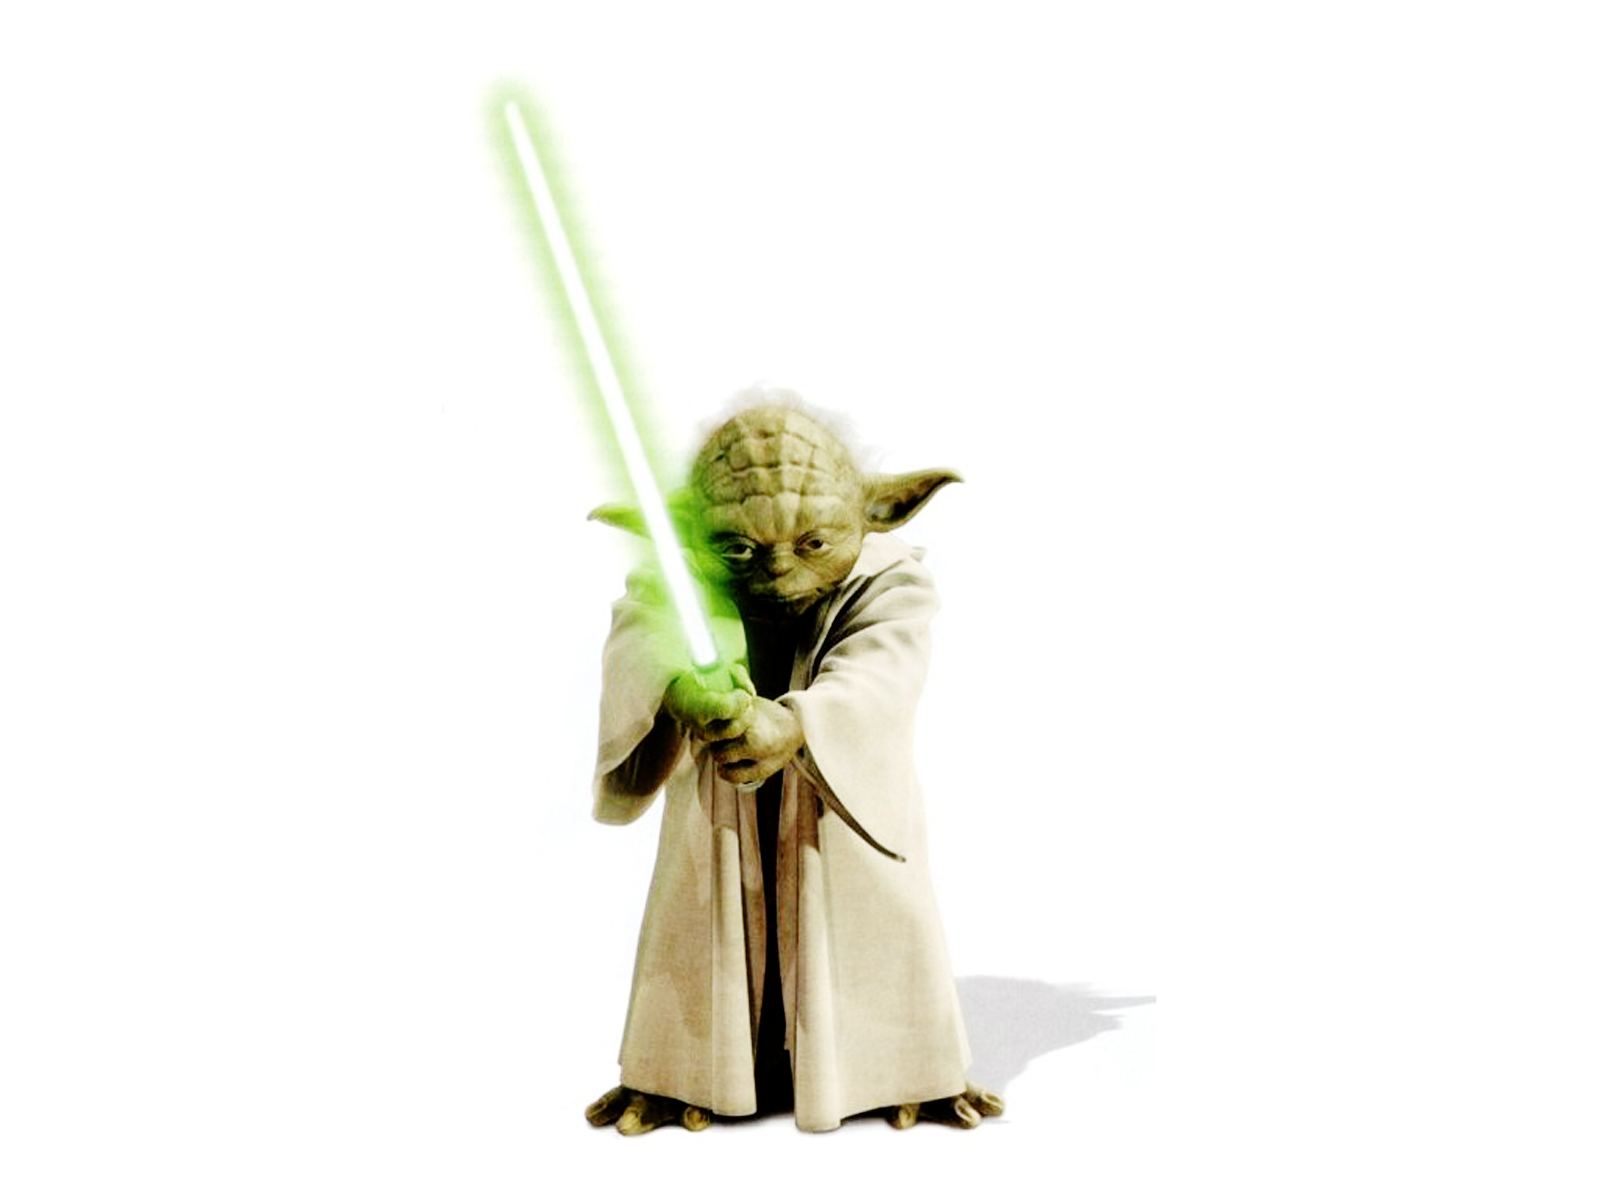 Master Yoda Star Wars HD Wallpapers HD Wallpapers Backgrounds